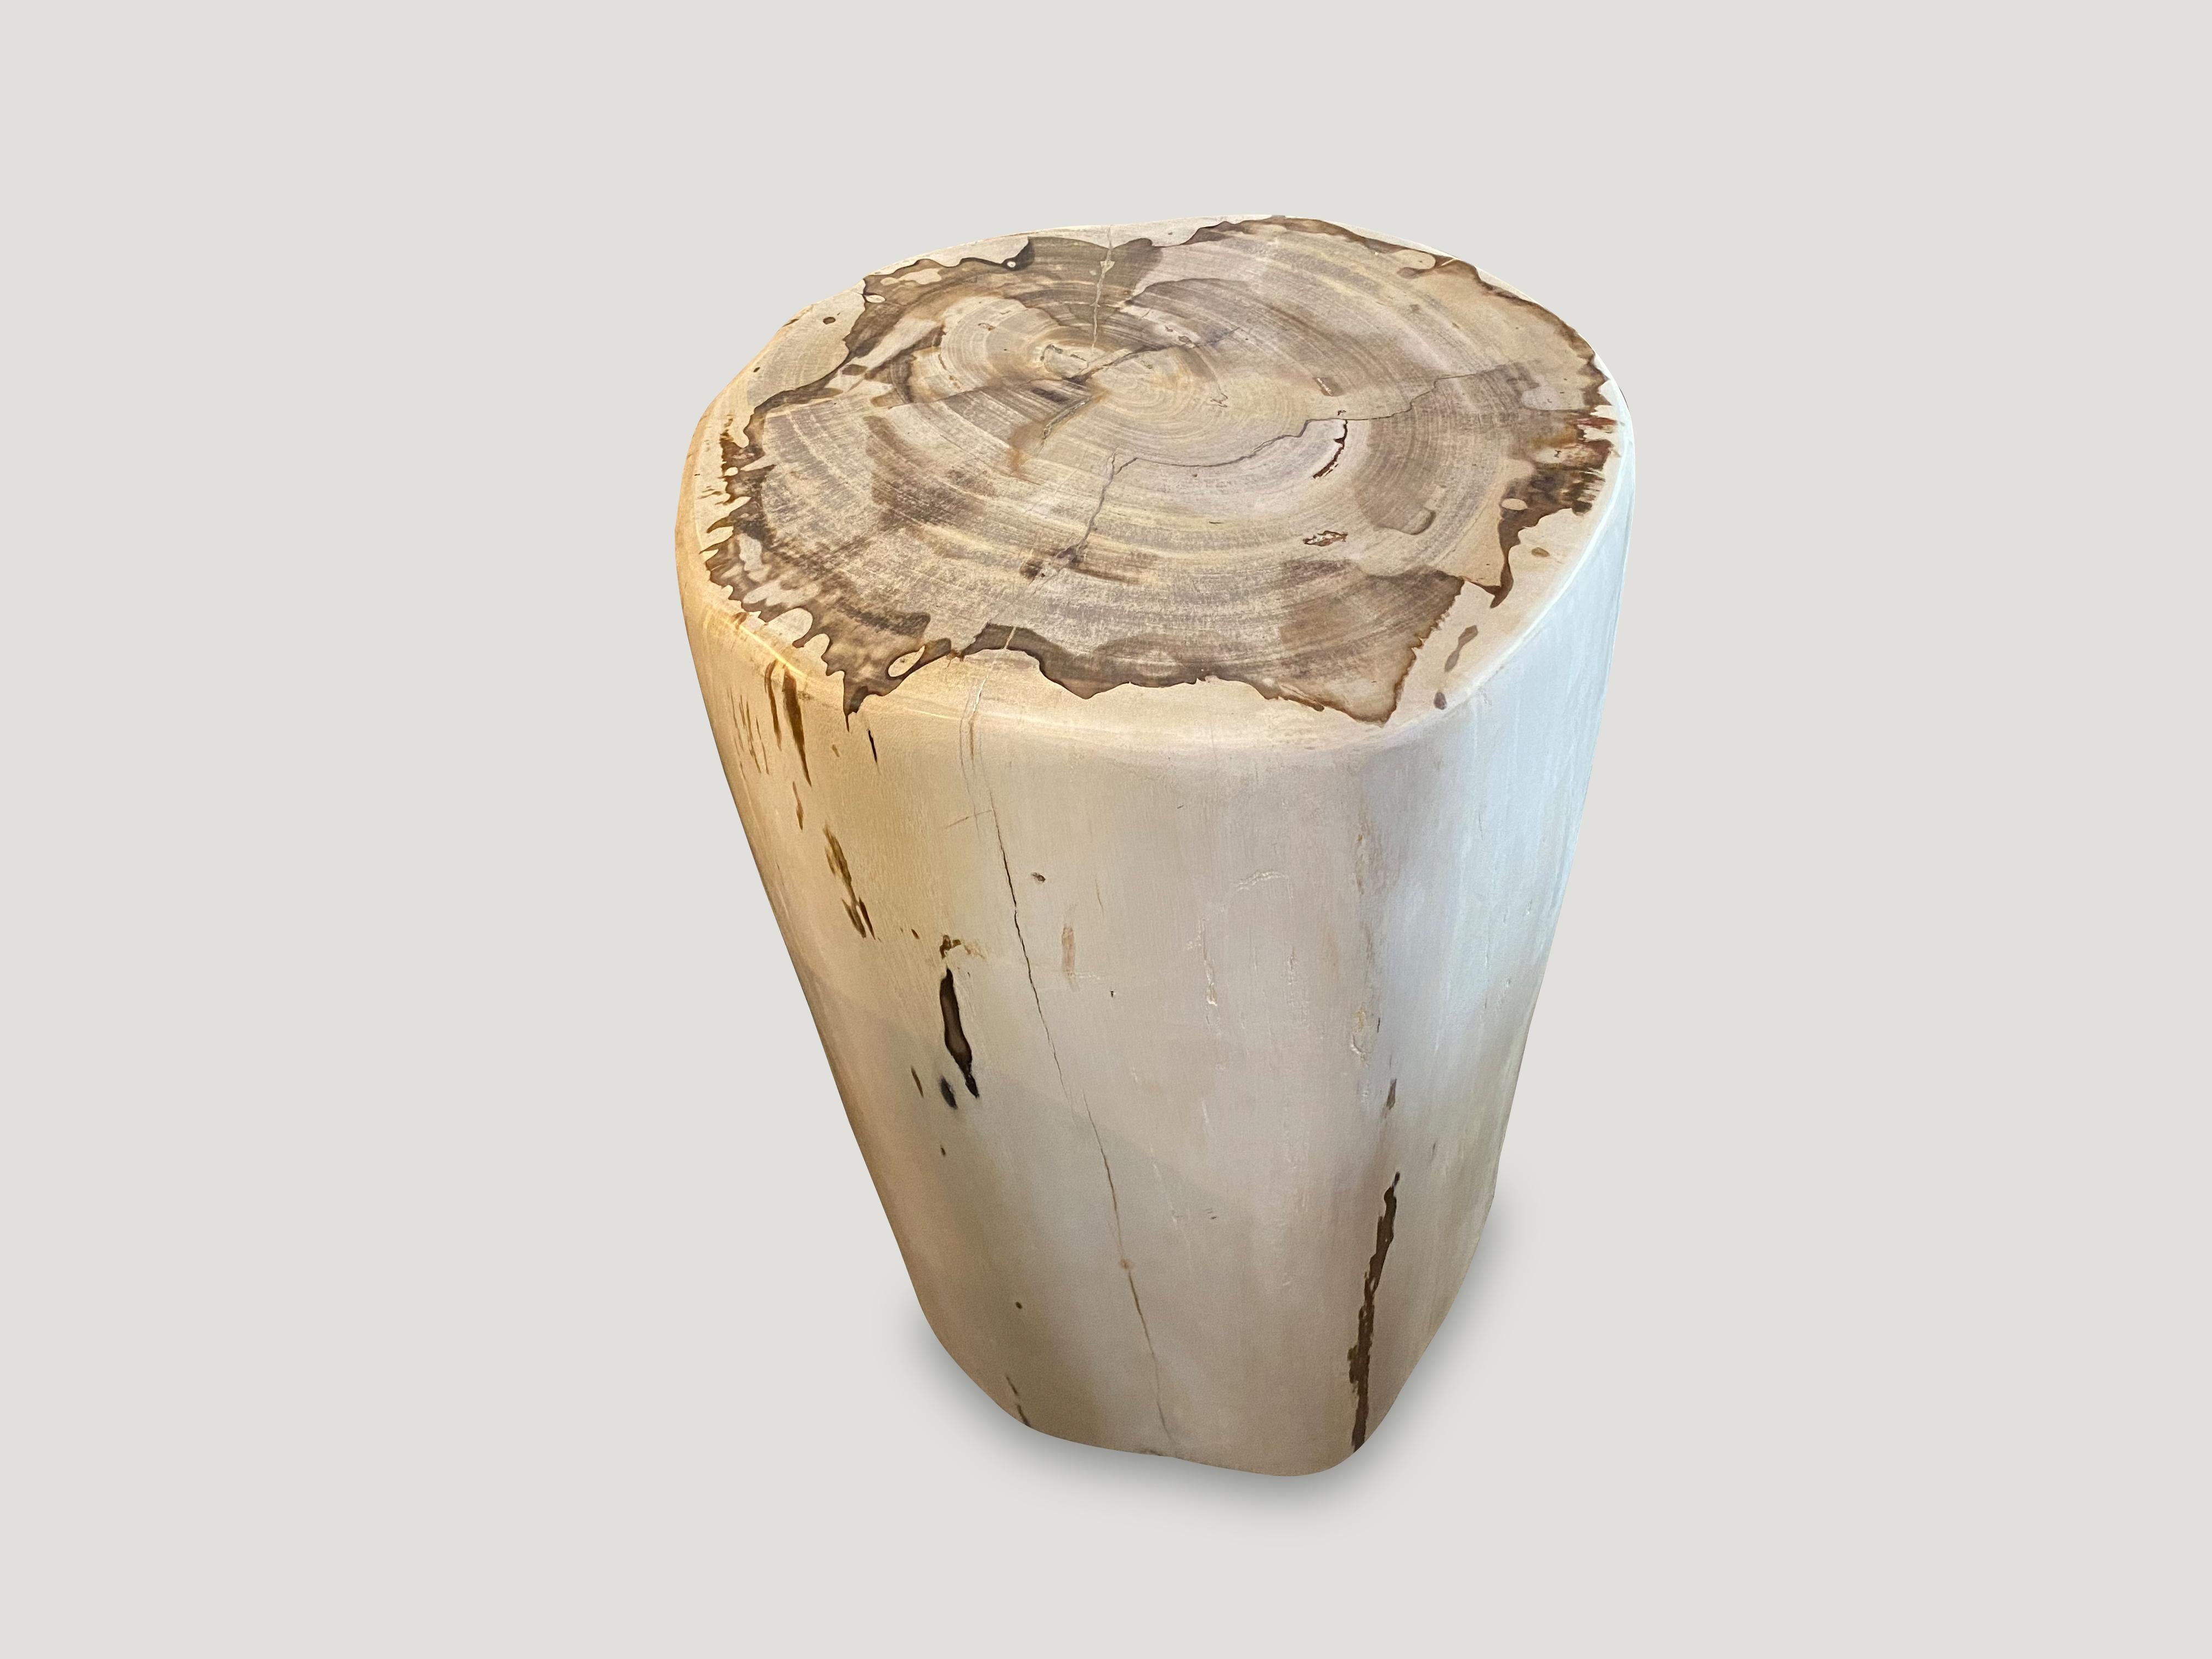 The palest tones are the hardest to source. Beautiful Minimalist petrified wood side table.

As with a diamond, we polish the highest quality fossilized petrified wood, using our latest ground breaking technology, to reveal its natural beauty and